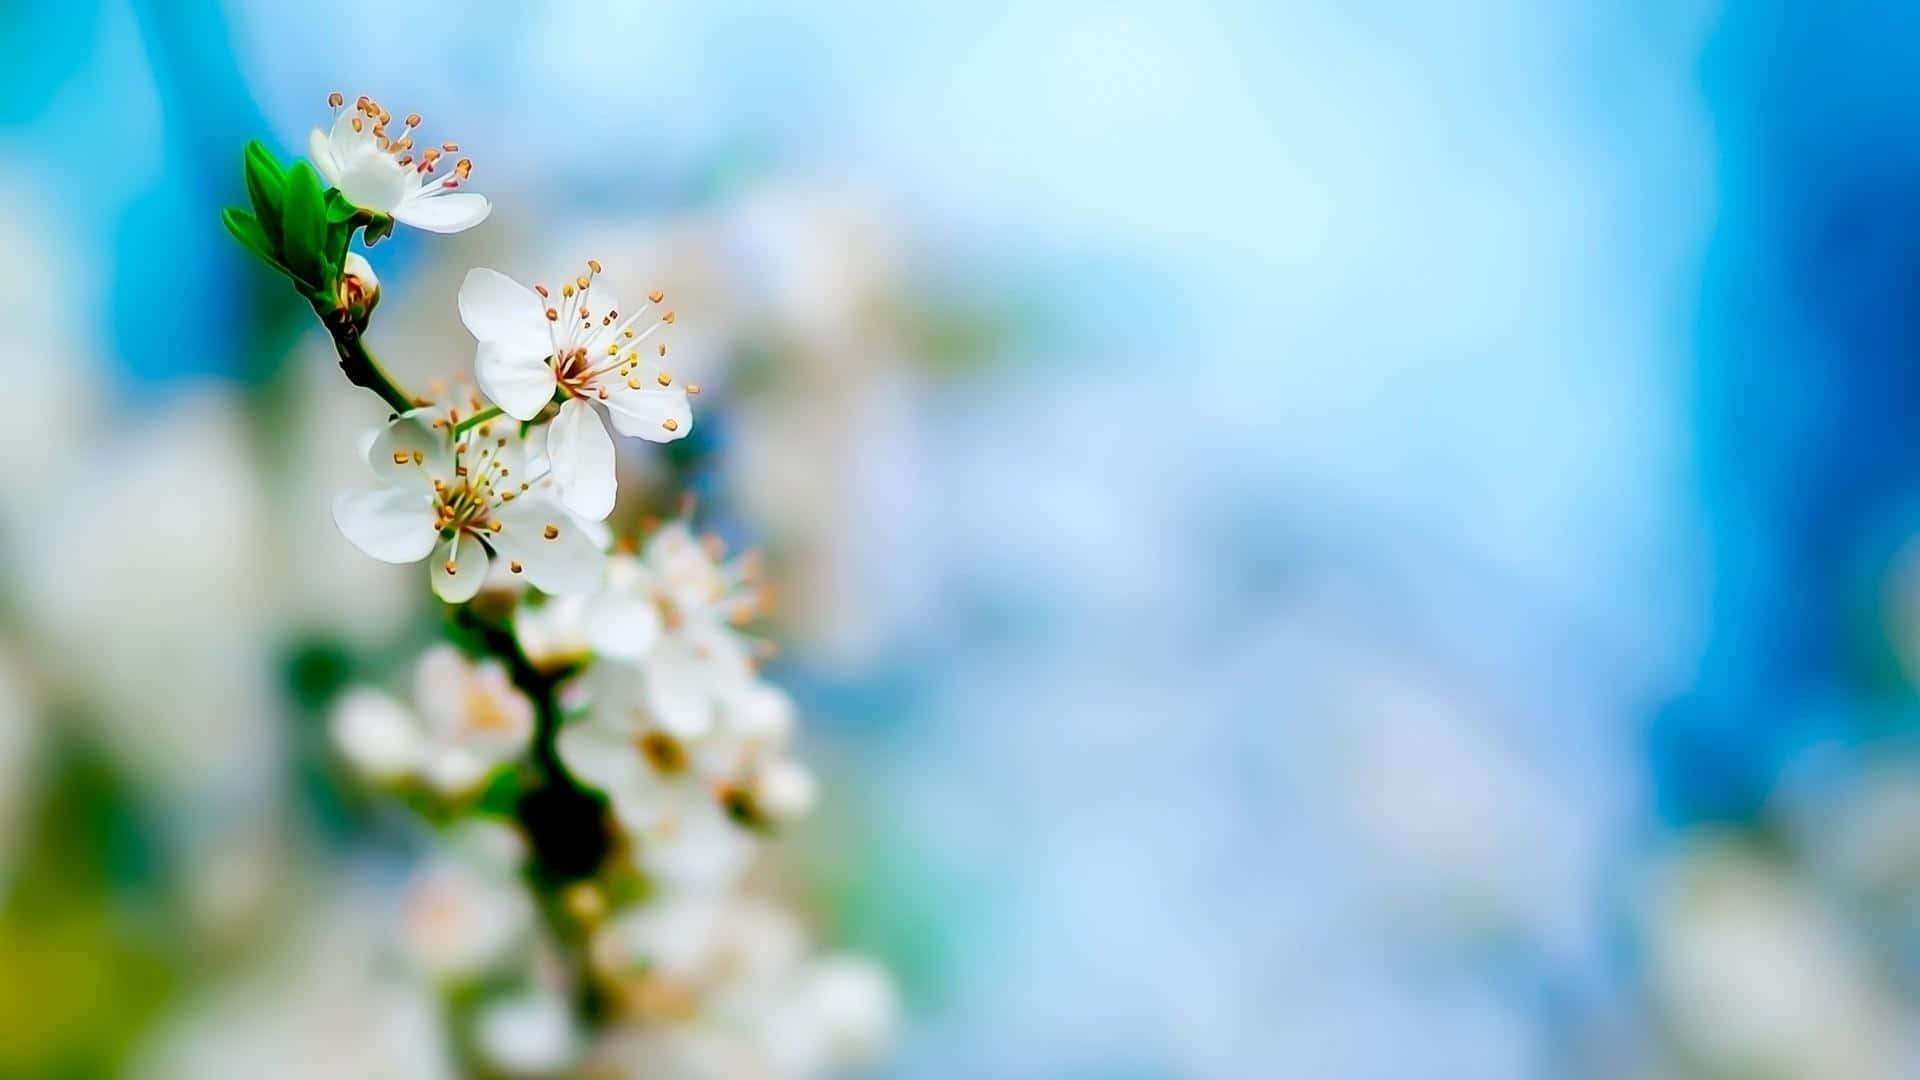 Stunning White Flowers Blooming in a Garden